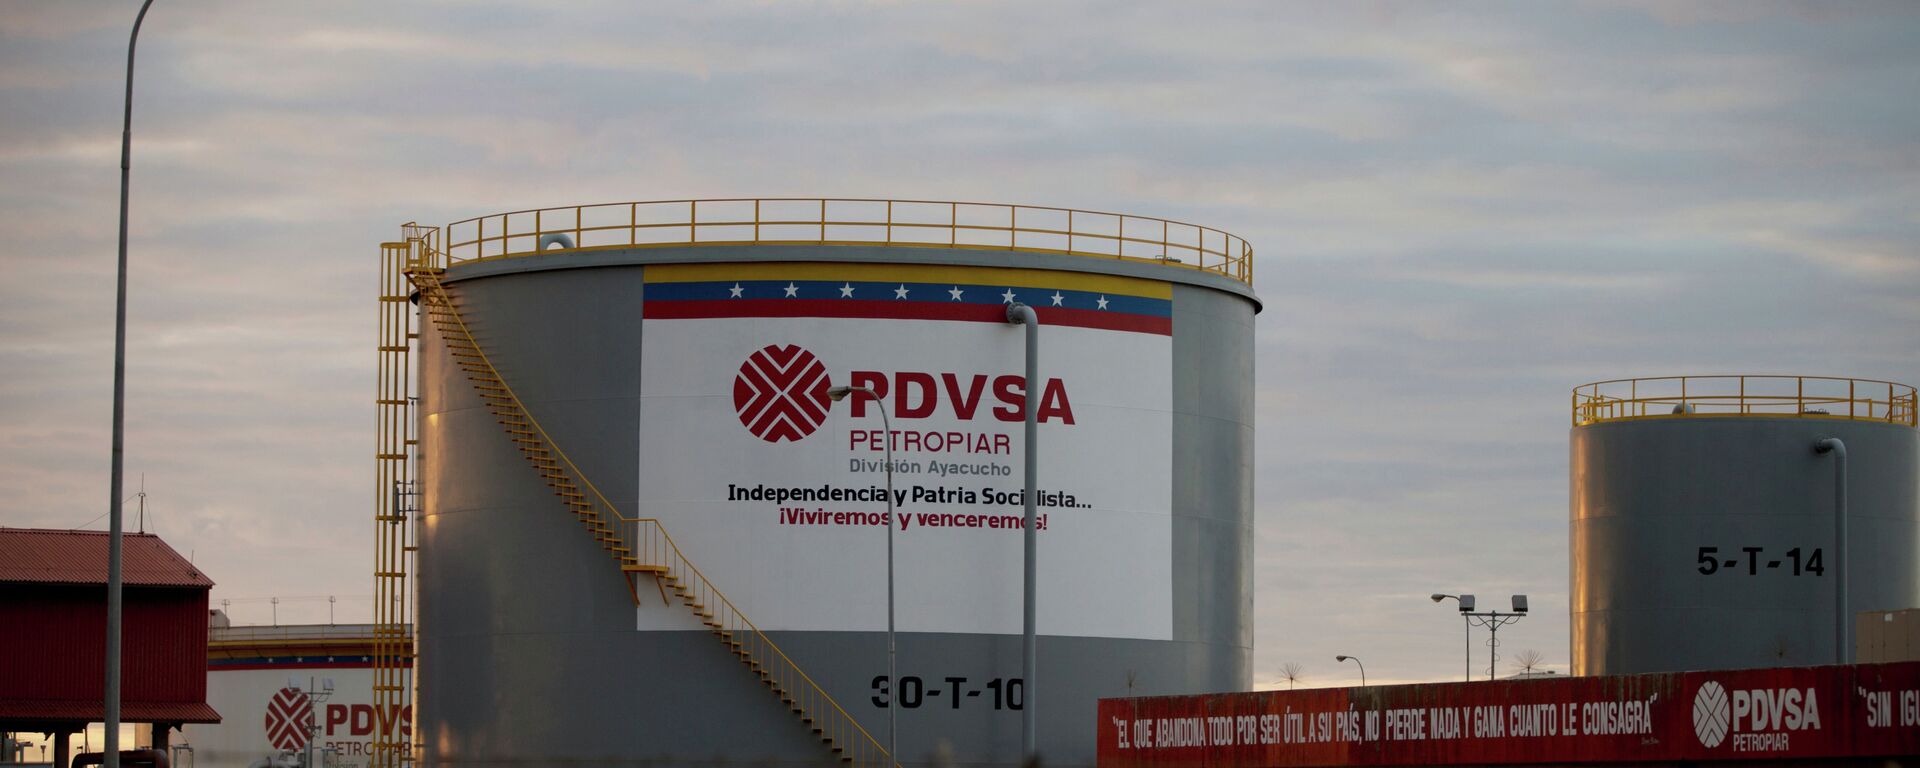 Storage tanks stand in a PDVSA state-run oil company crude oil complex near El Tigre, a town located within Venezuela's Hugo Chavez oil belt, formally known as the Orinoco Belt - Sputnik International, 1920, 29.11.2022